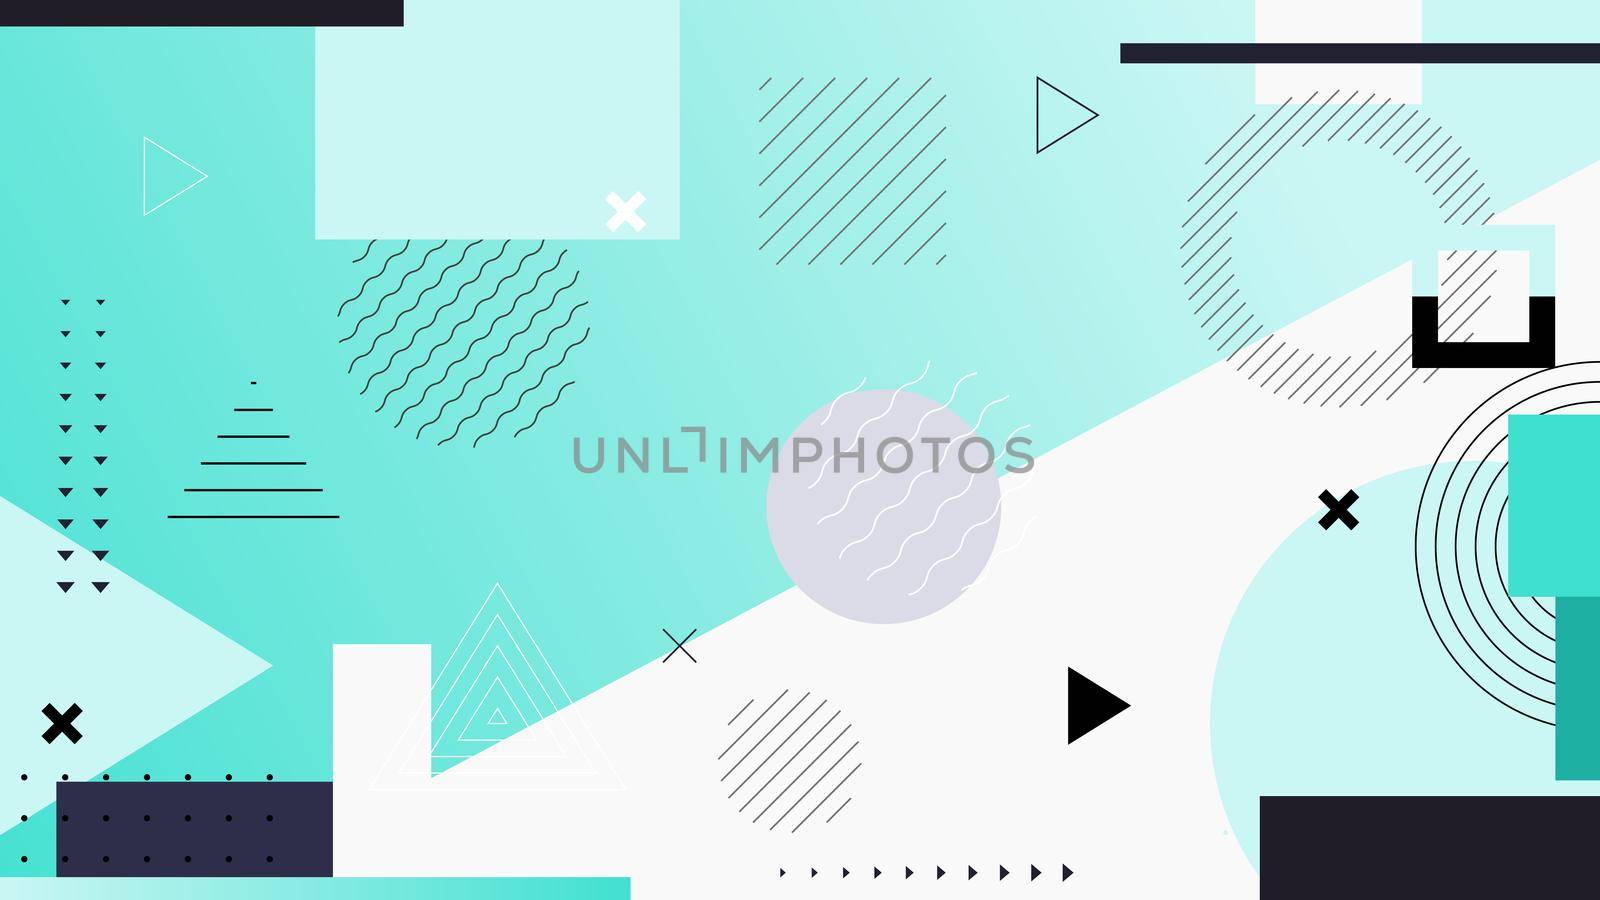 Dark vector geometric backround. Abstract design styled vintage trends 80-s. Minimalistic background.